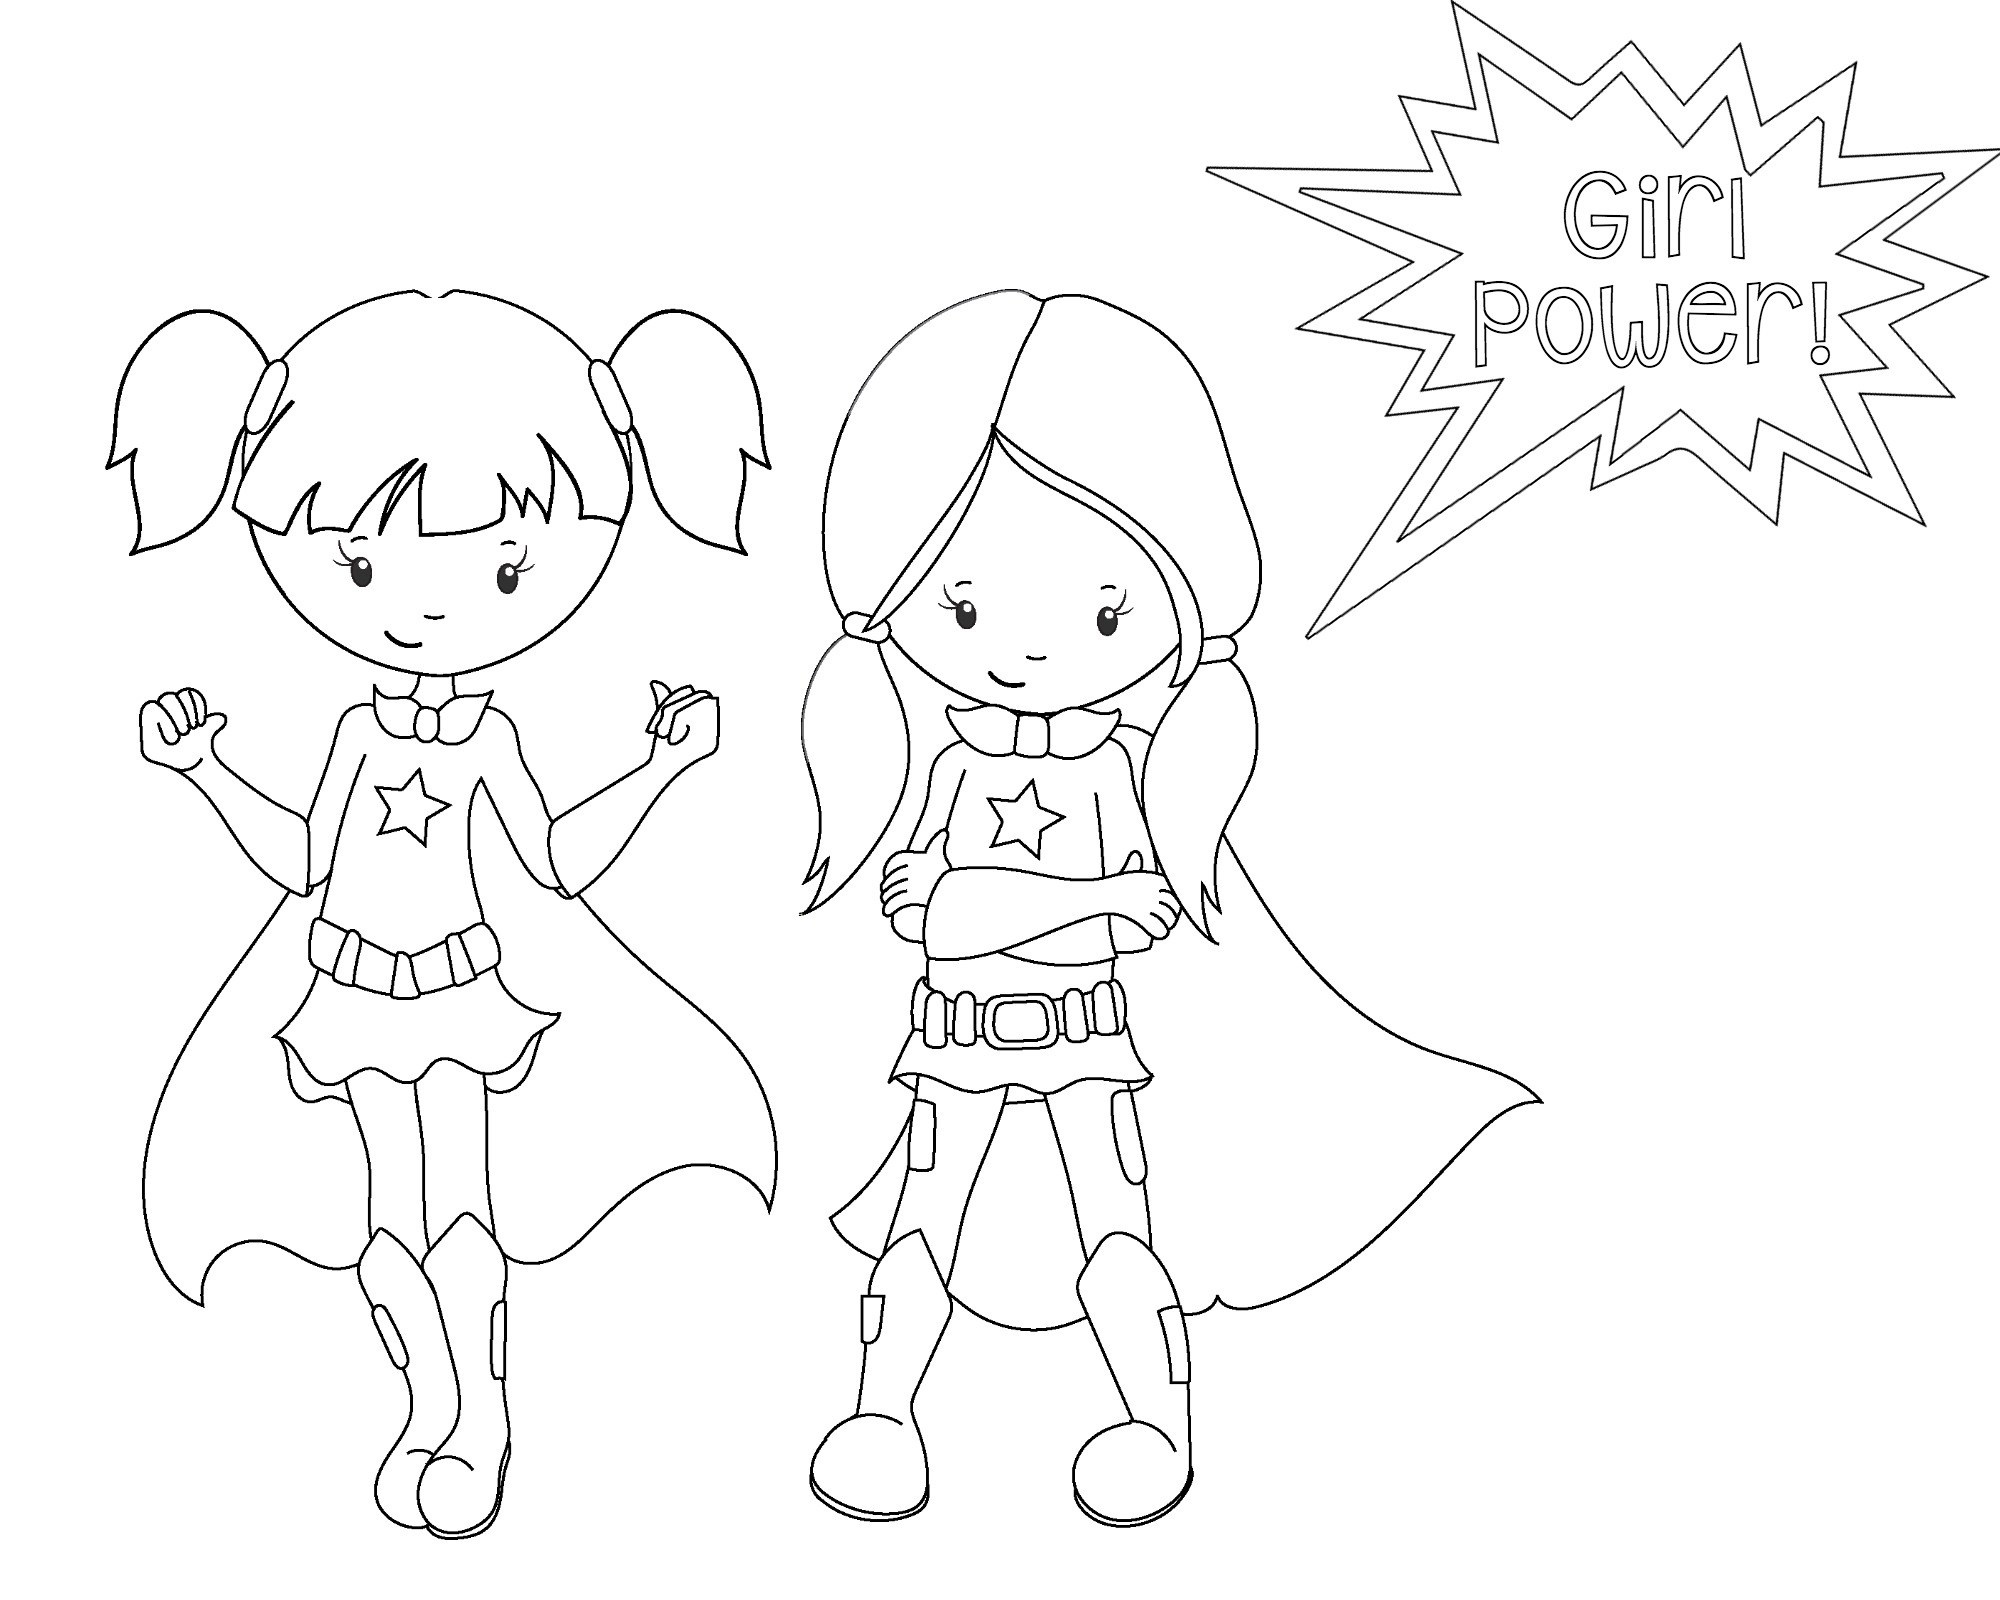 Super Heroes Coloring Pages Free Printable Superhero Coloring Sheets - Free Printable Superhero Coloring Pages